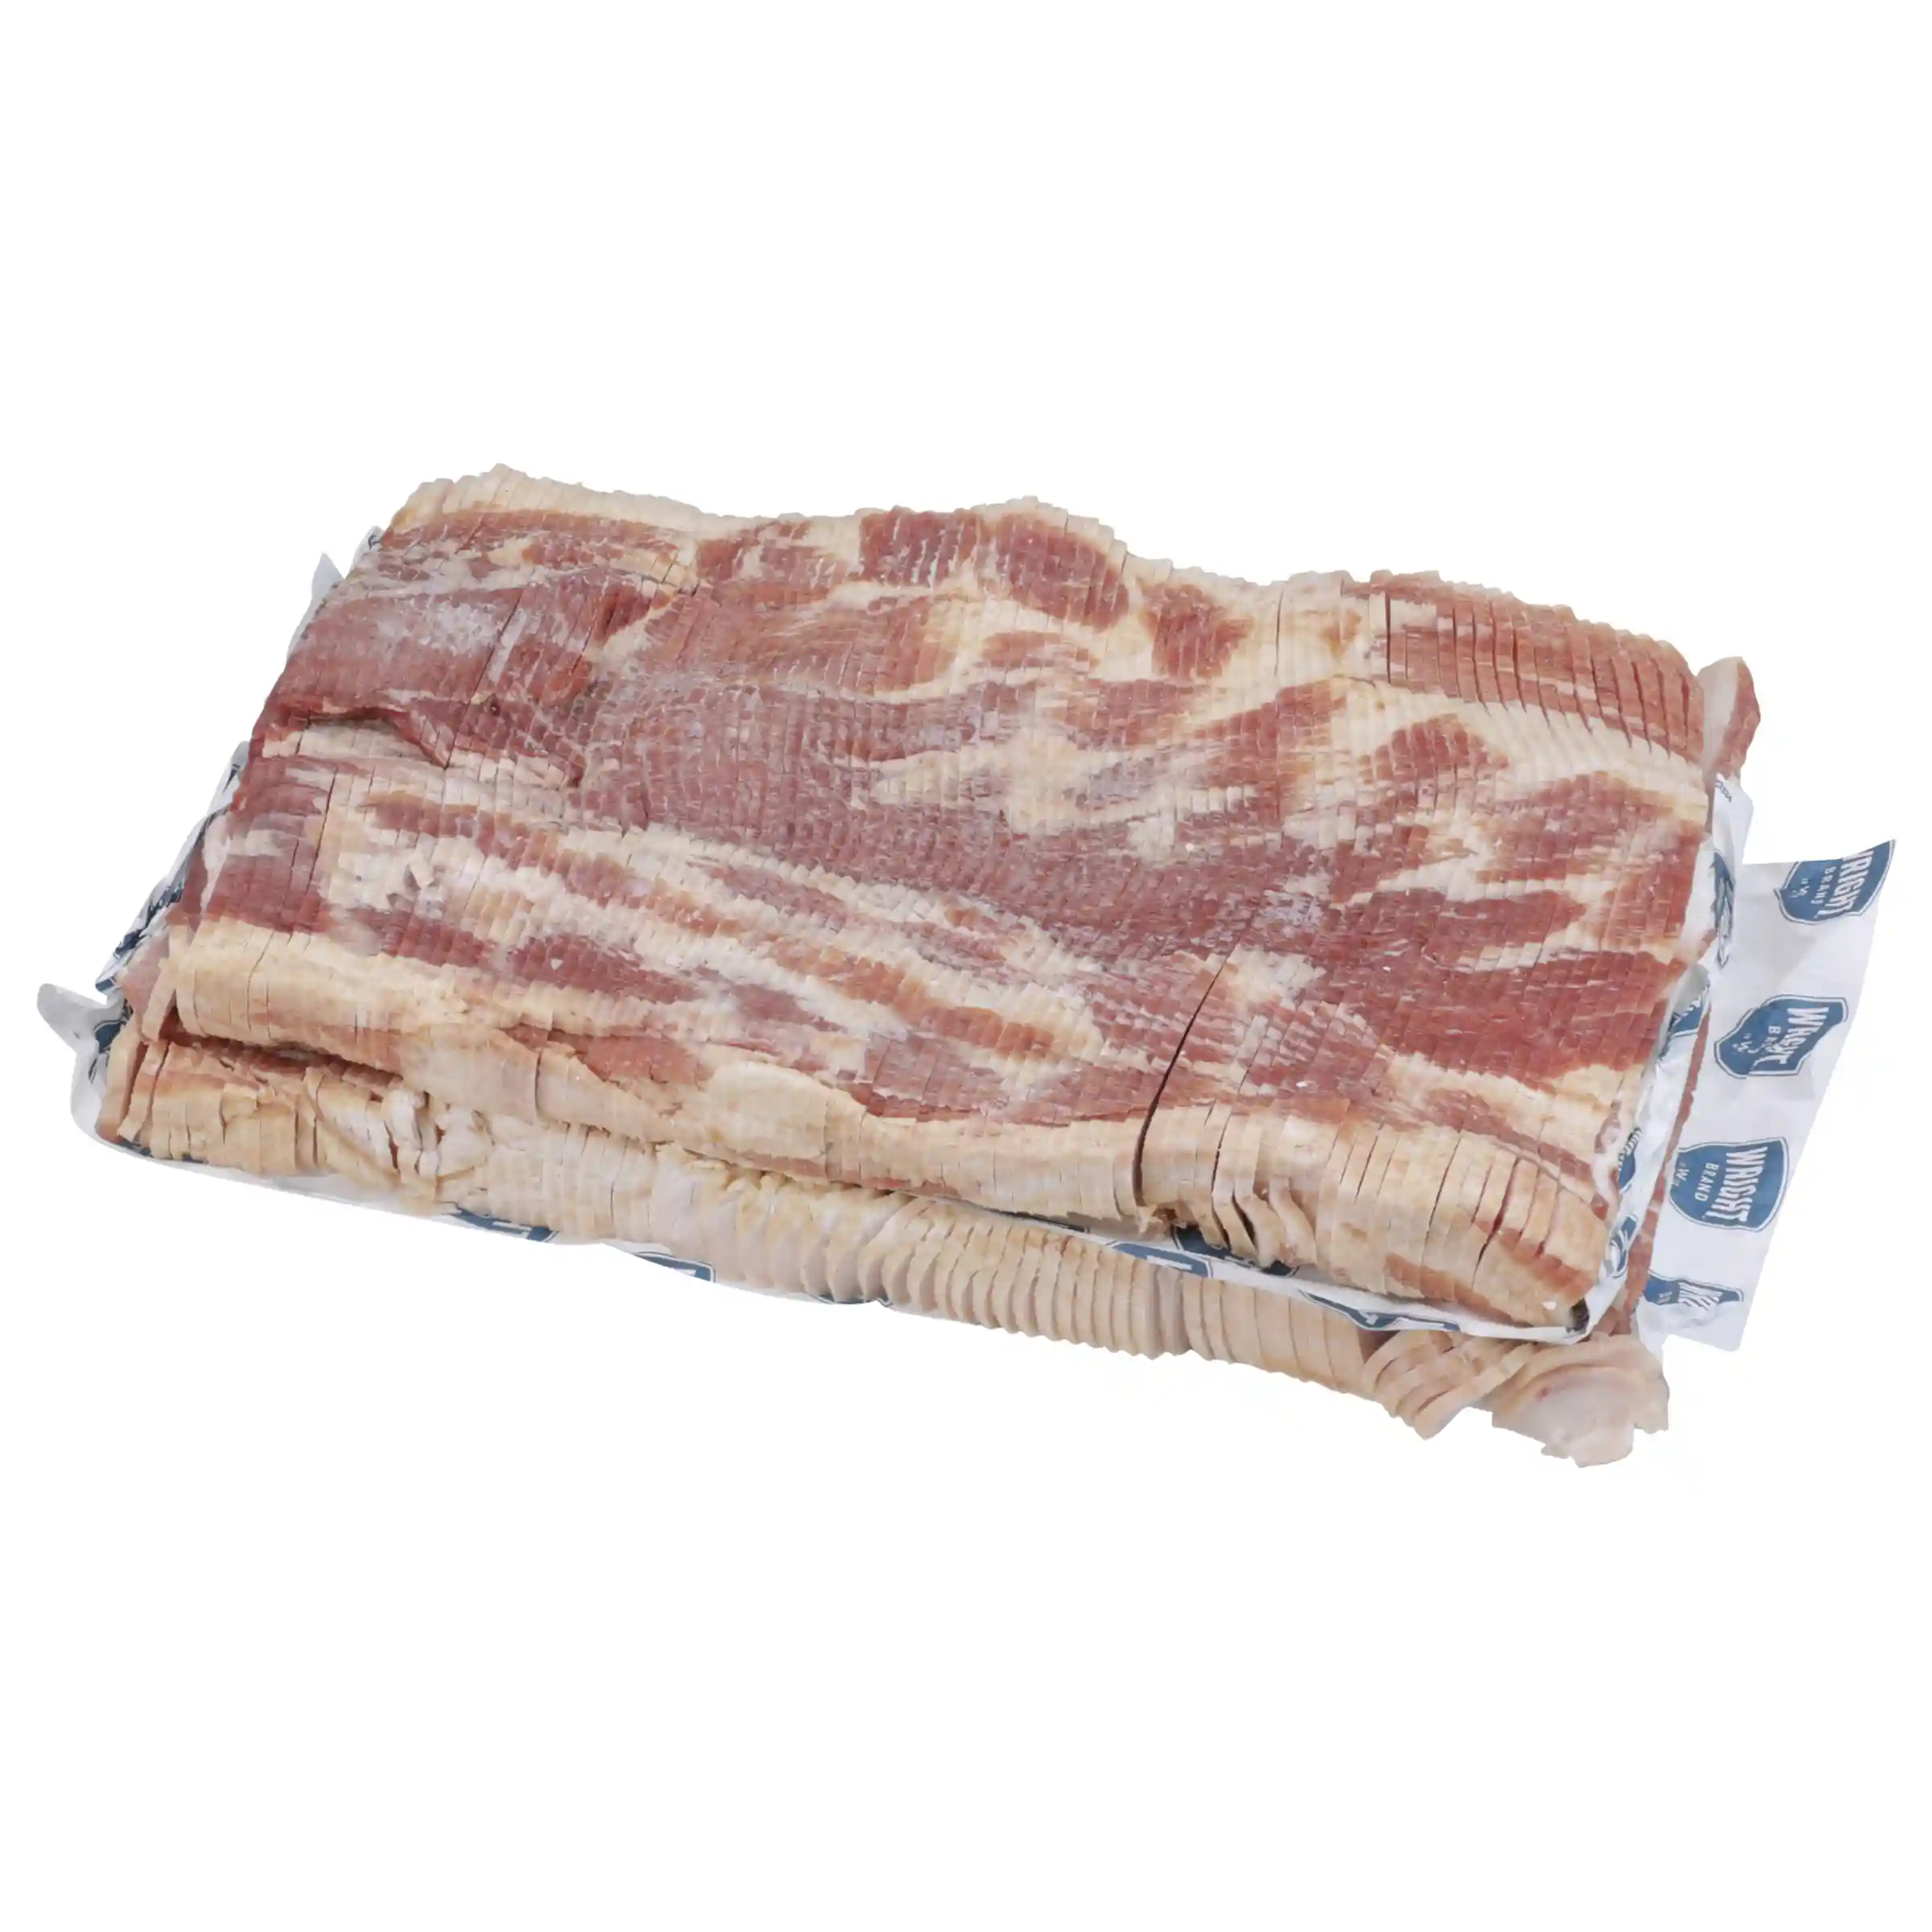 Wright® Brand Naturally Hickory Smoked Regular Sliced Bacon, Bulk, 15 Lbs, 6 Slices/Inch, Frozen_image_21